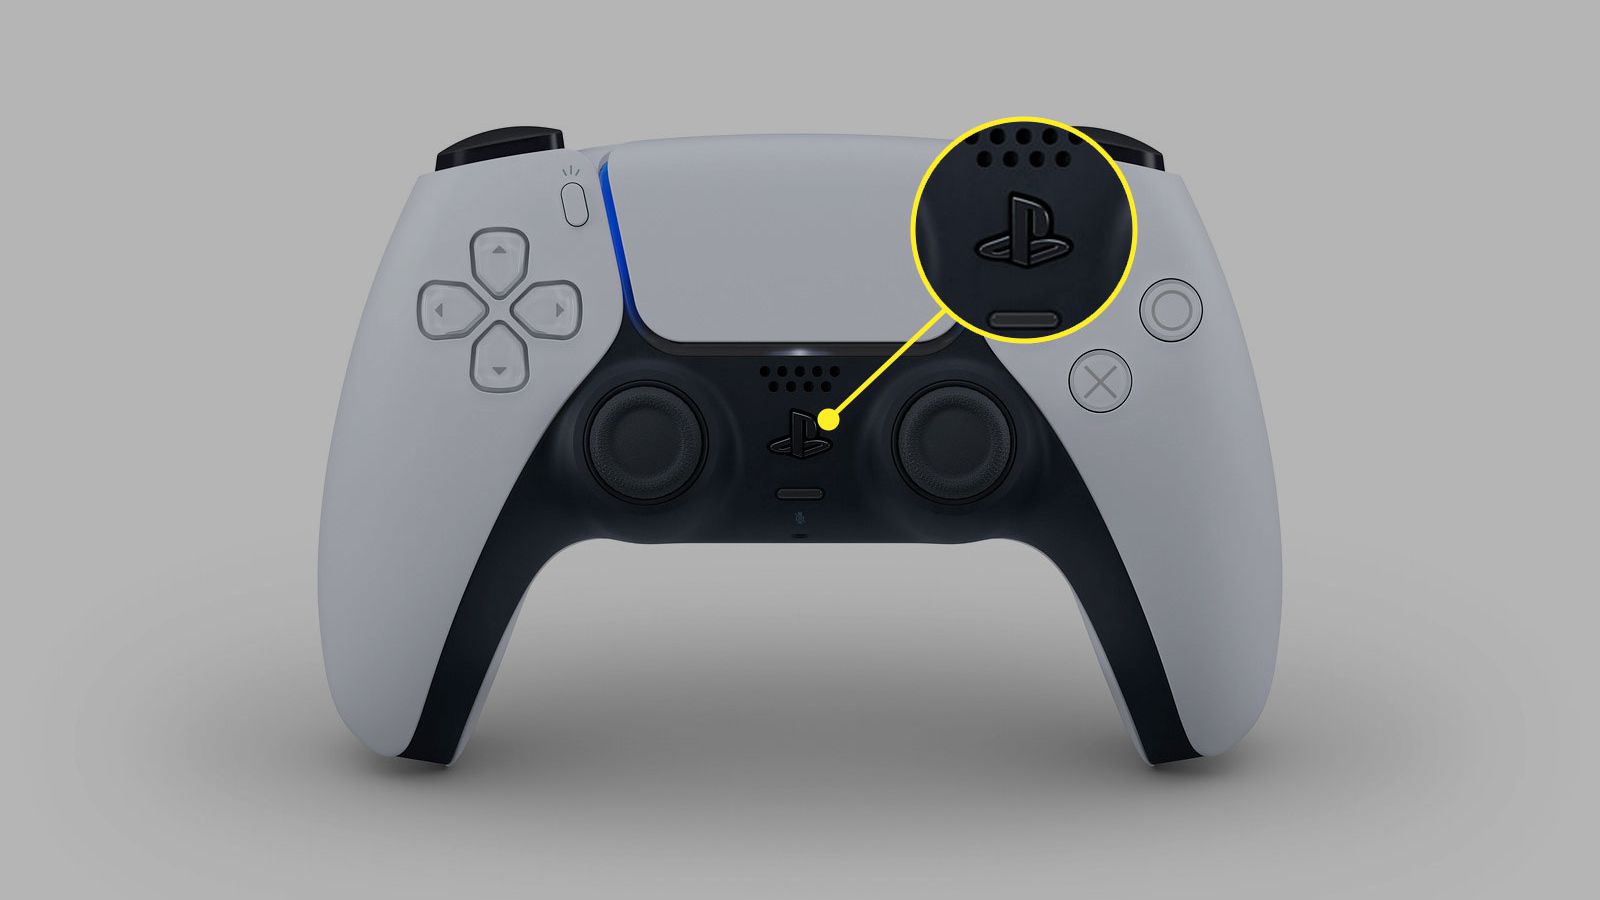 How to Sync a PS5 Controller